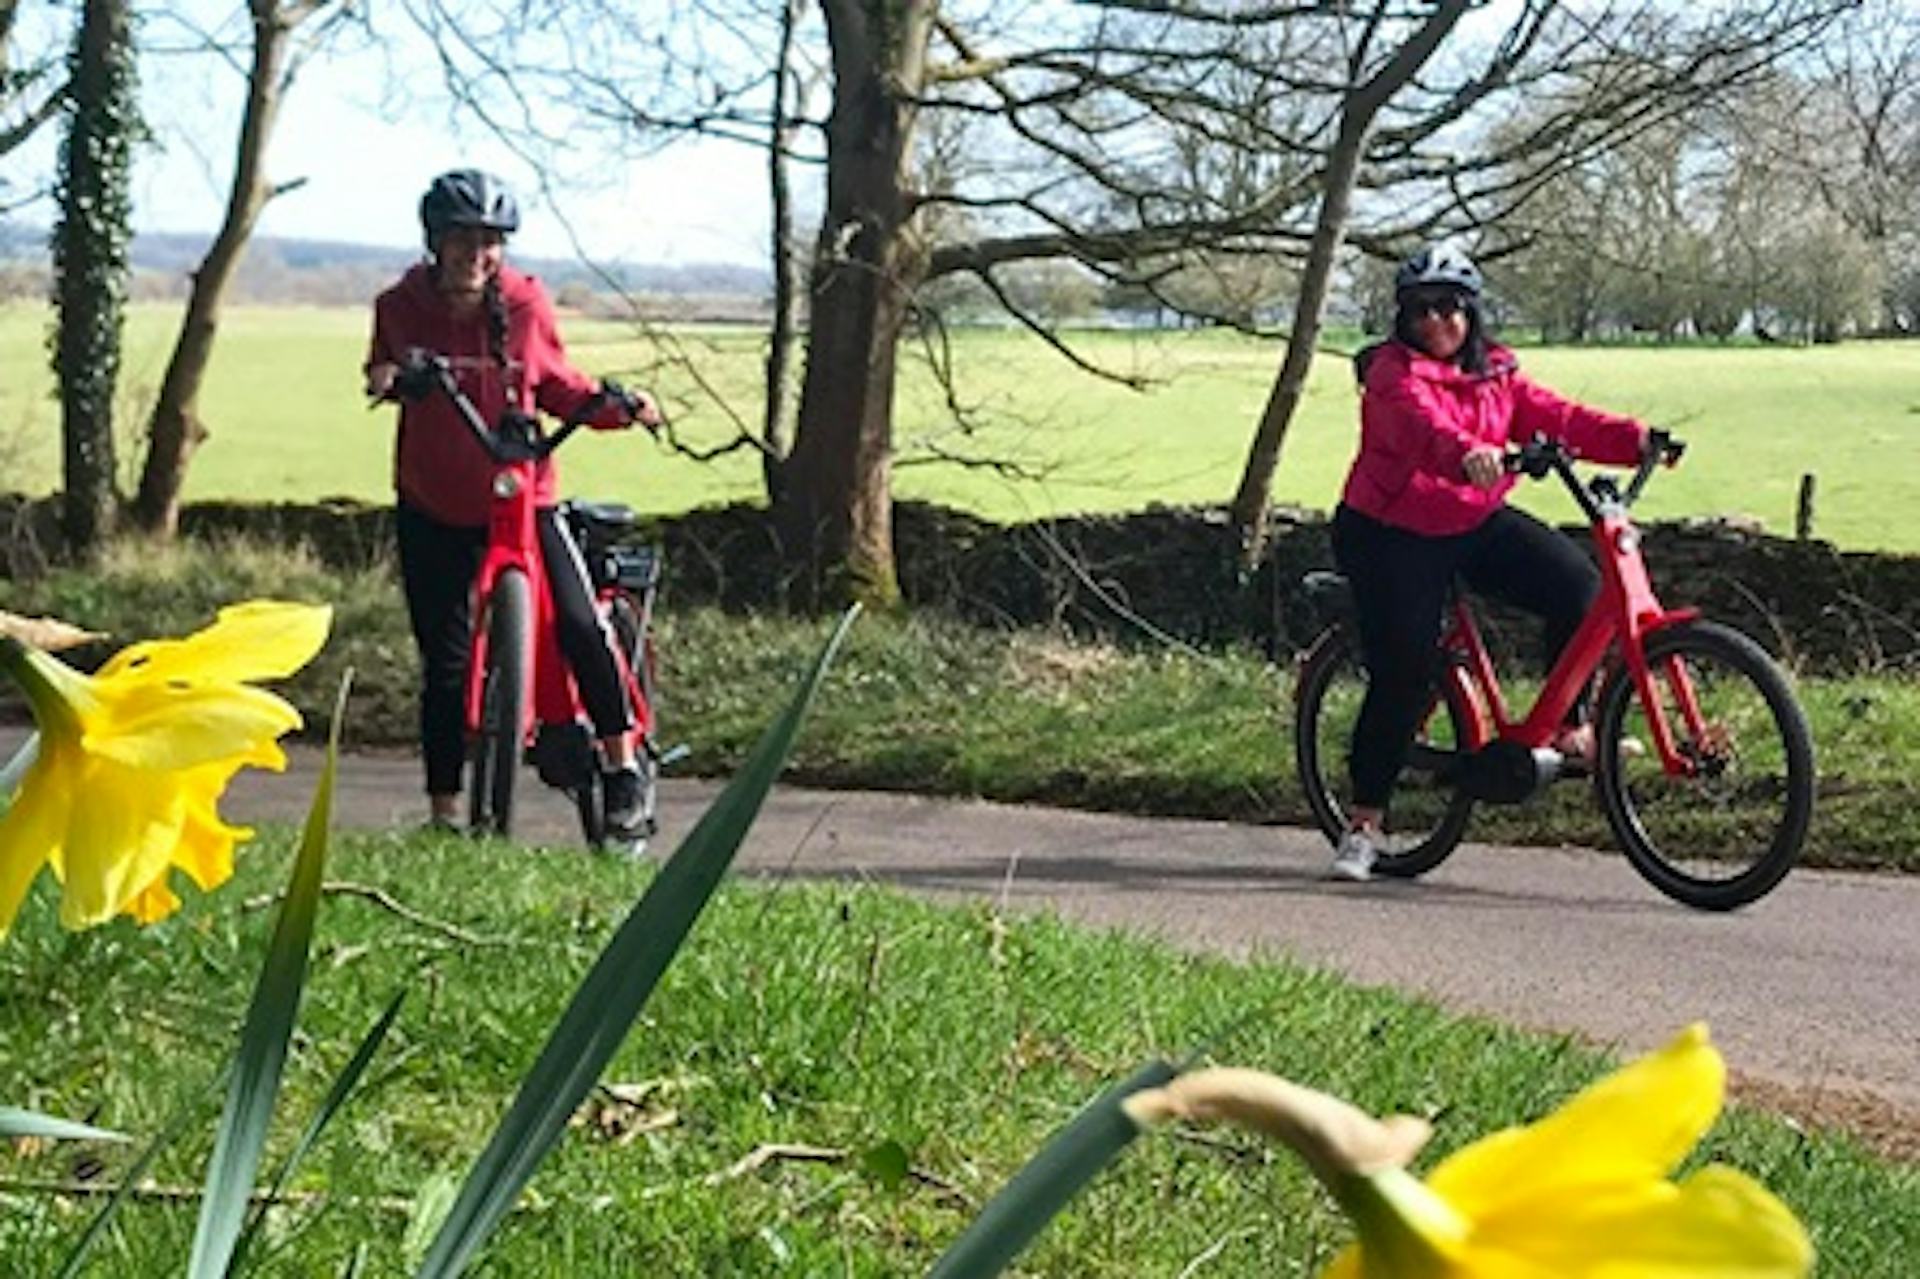 Full Day Electric Bike Self Guided Tour for Two in the Heart of the North Cotswolds